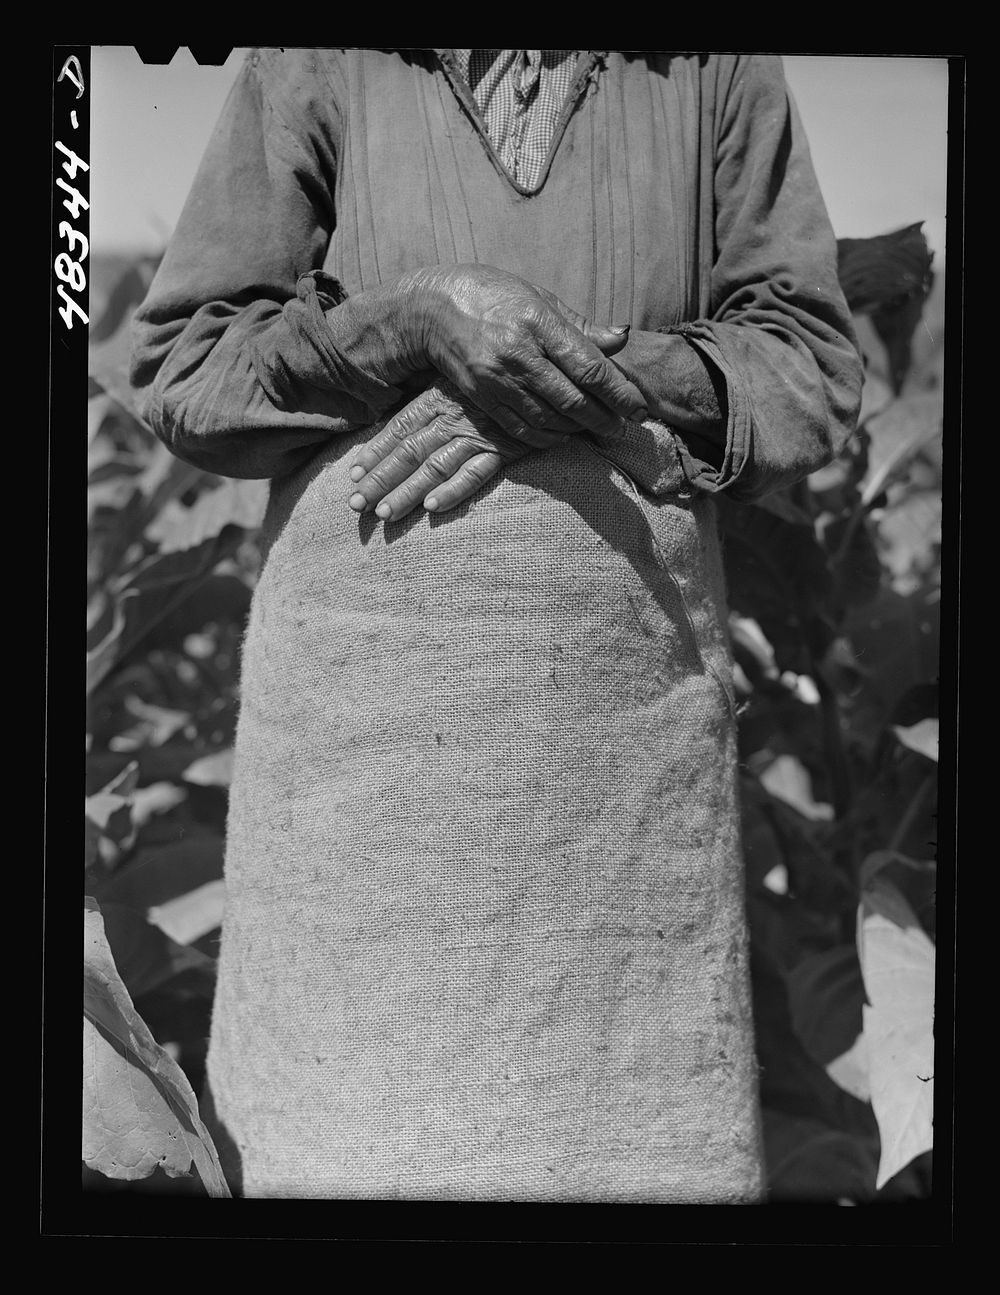 Barranquitas (vicinity), Puerto Rico. Hands of an old woman working in a tobacco field. Sourced from the Library of Congress.